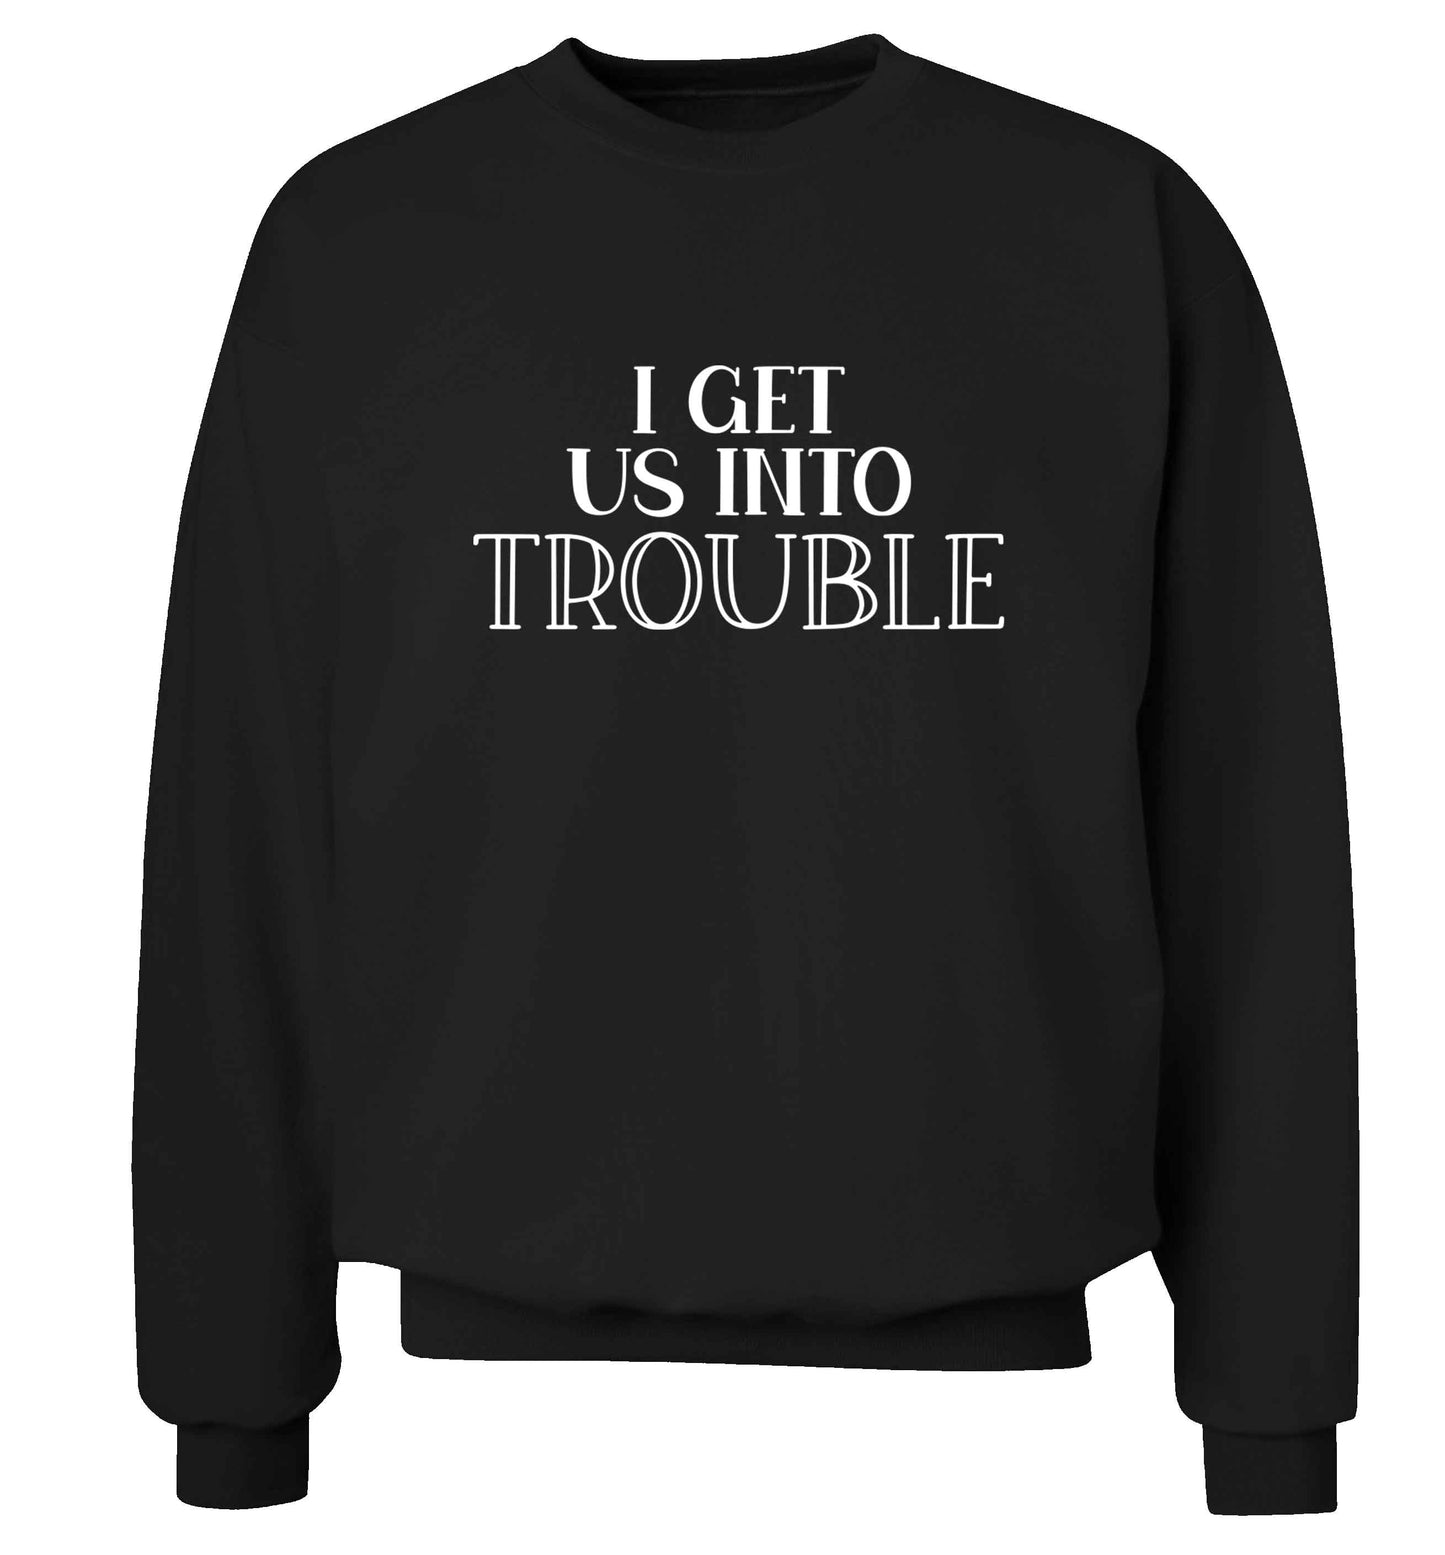 I get us into trouble adult's unisex black sweater 2XL